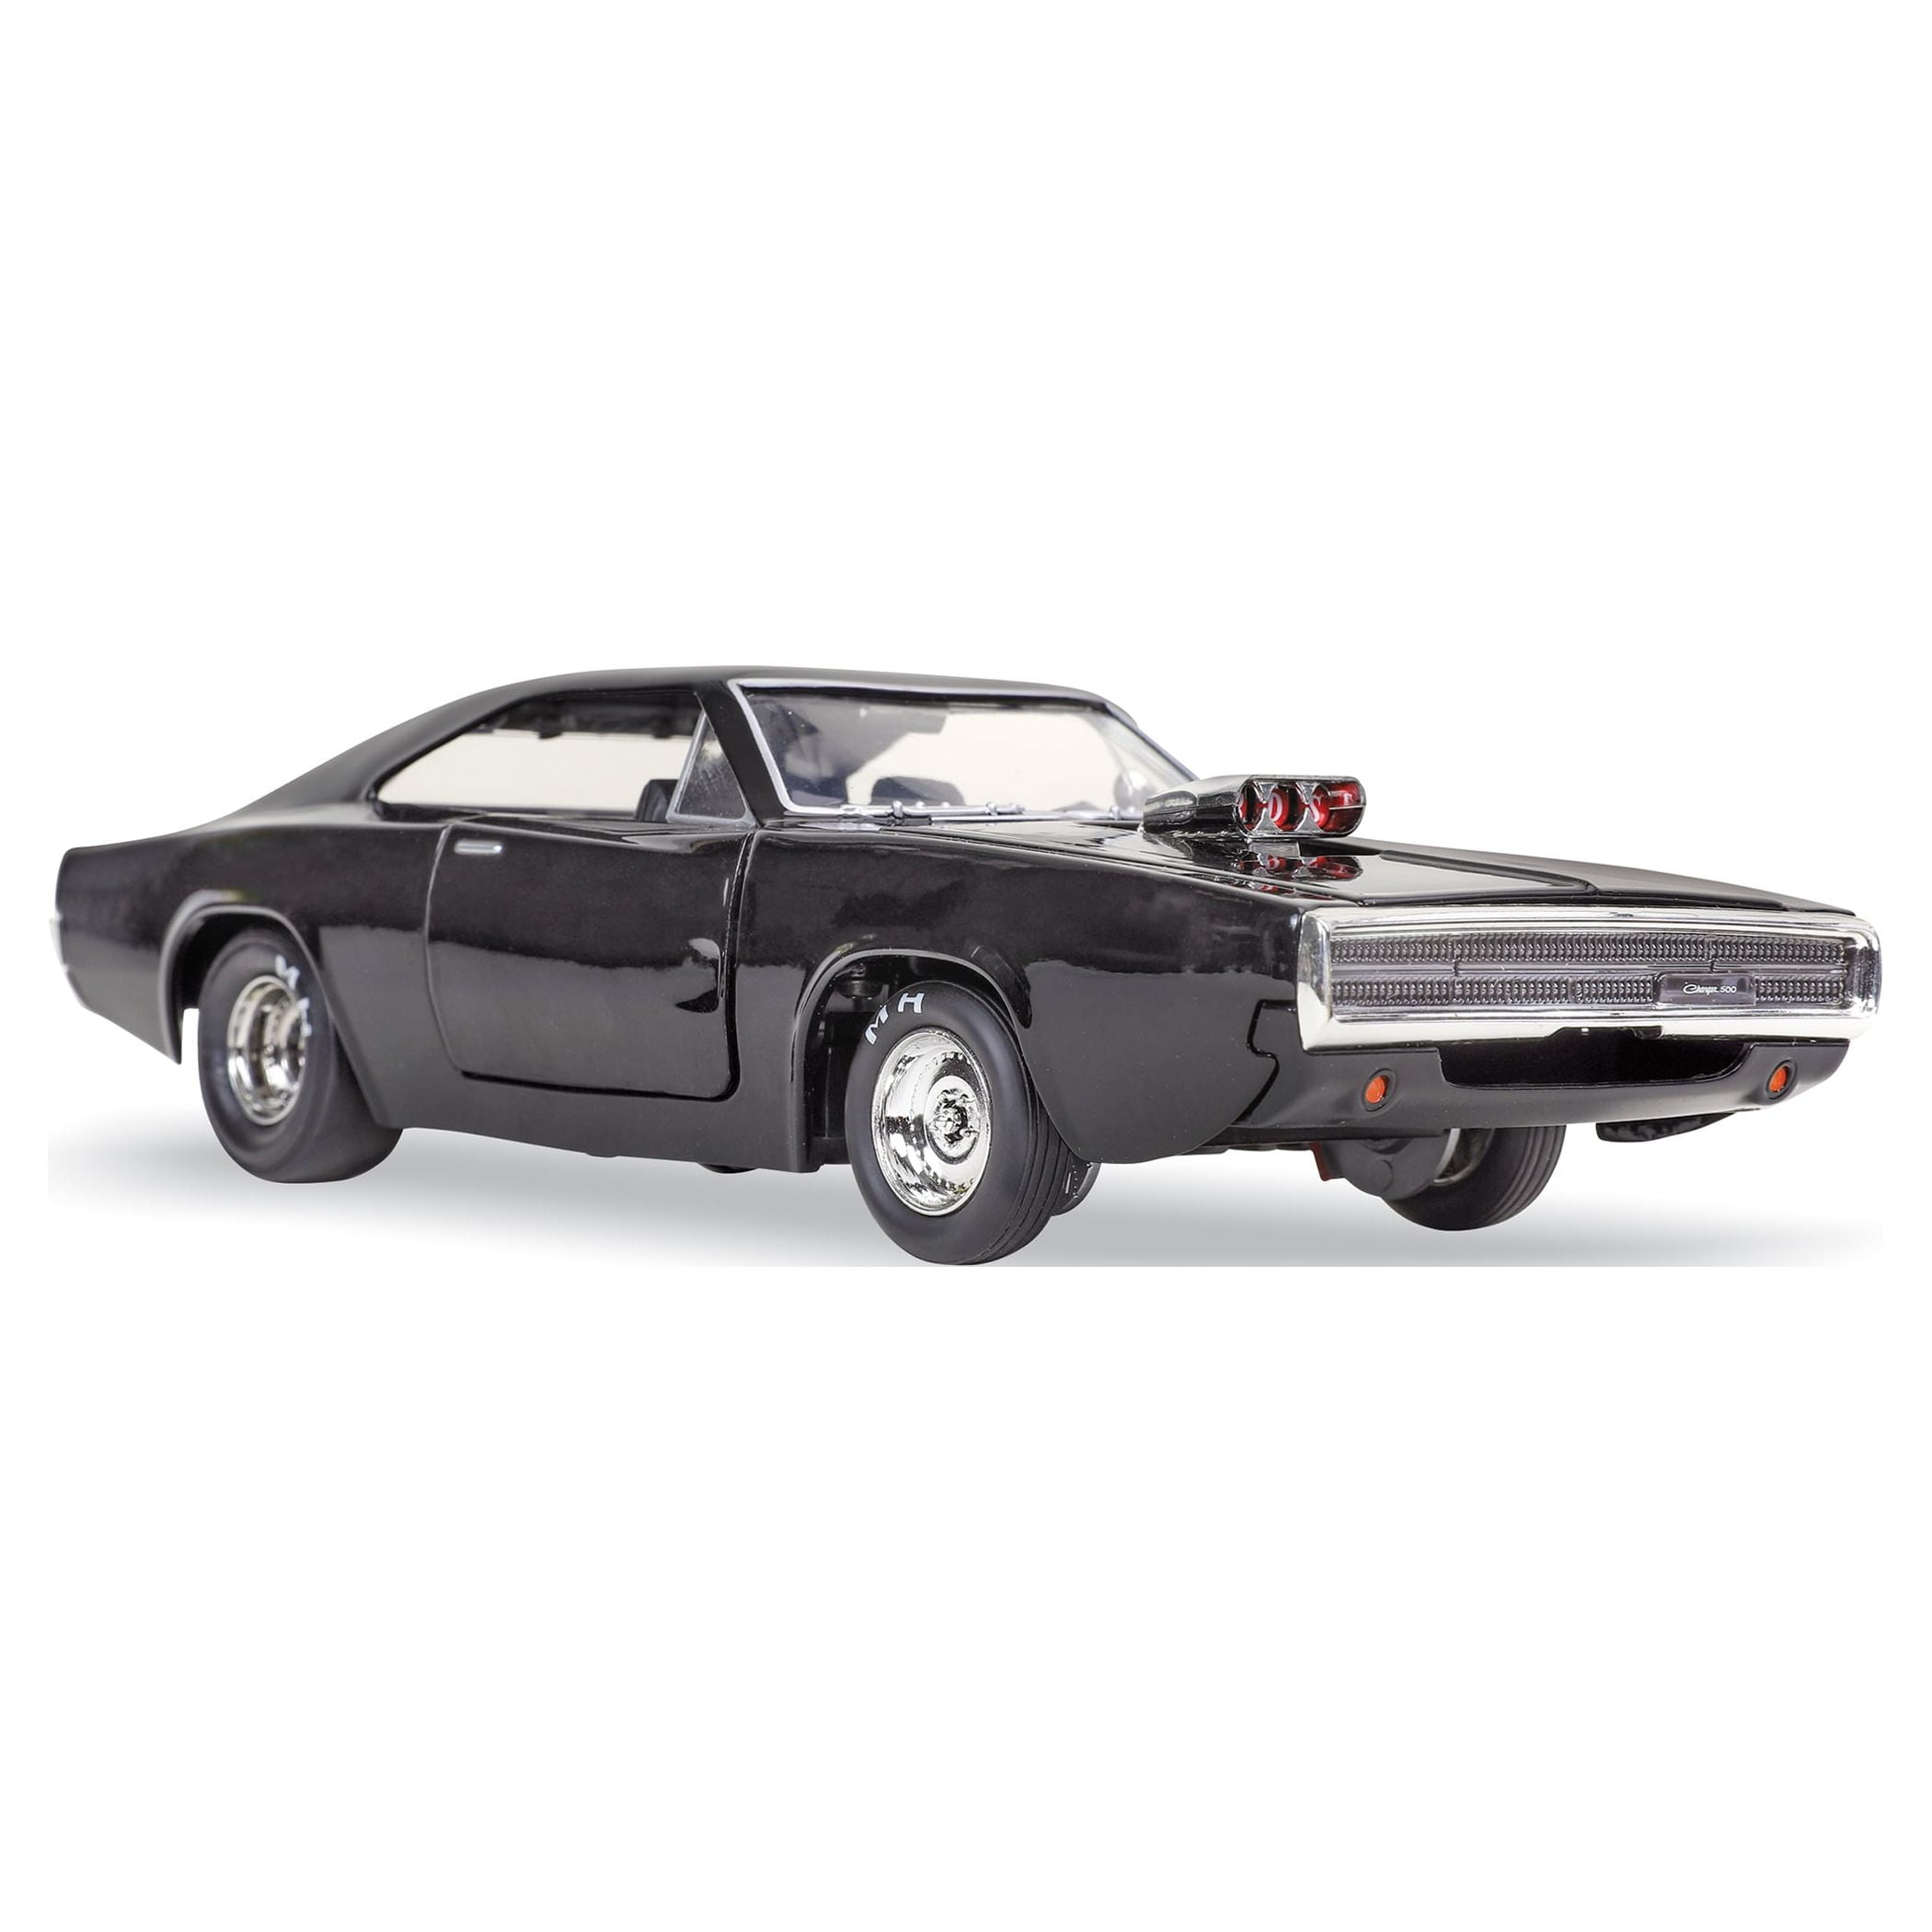 Fast & Furious 1:24 1970 Dom's Dodge Charger Die-cast Car Play Vehicles 